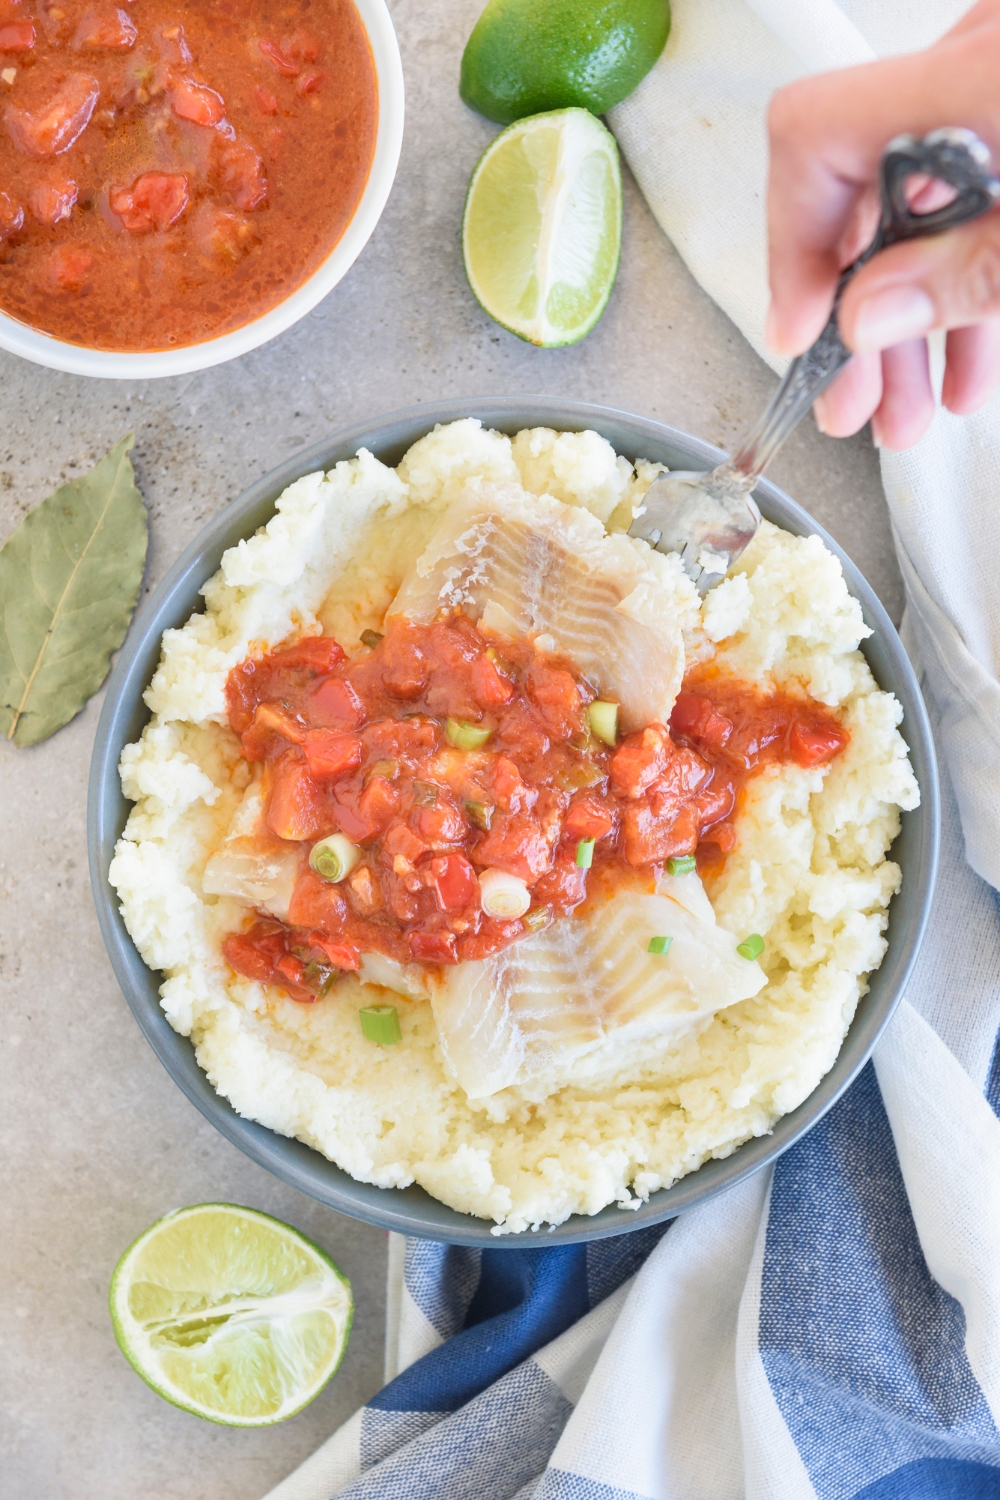 Someone sticks a silver spoon into a blue bowl full of fish and grits. Extra limes and tomato sauce are near by.